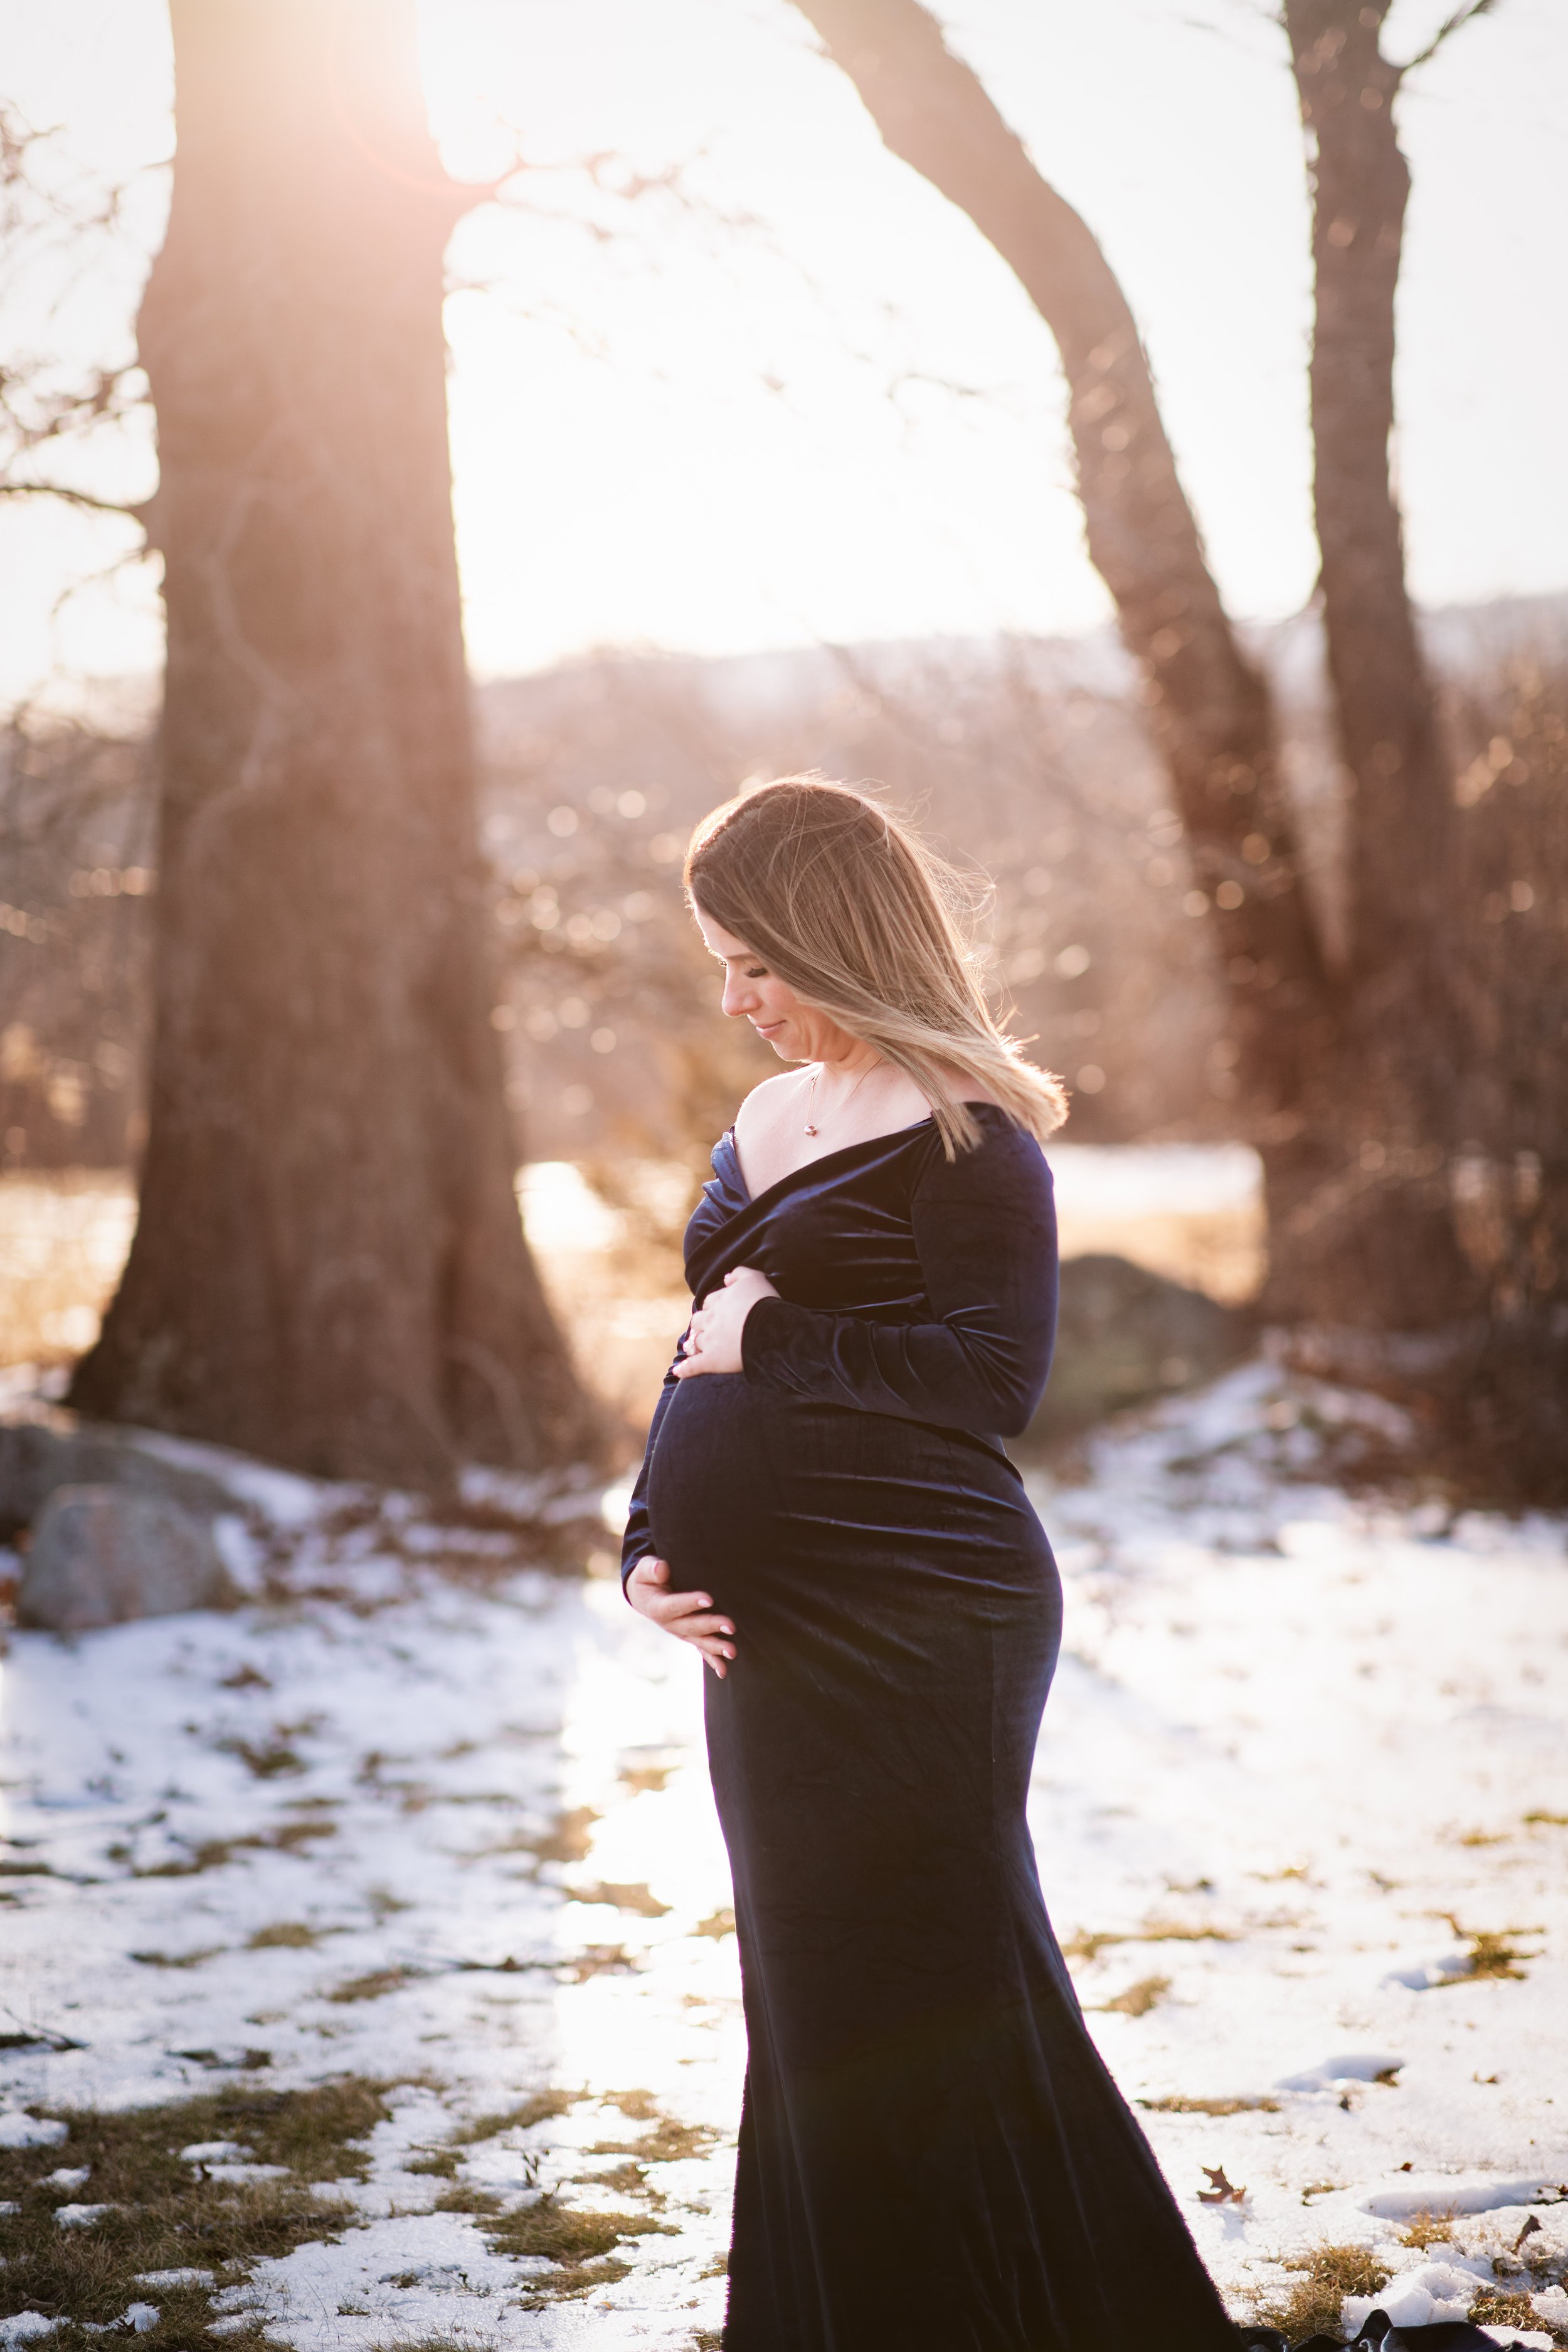  Woman in romantic black maternity gown framed between trees while standing in a snowy field near sunset 